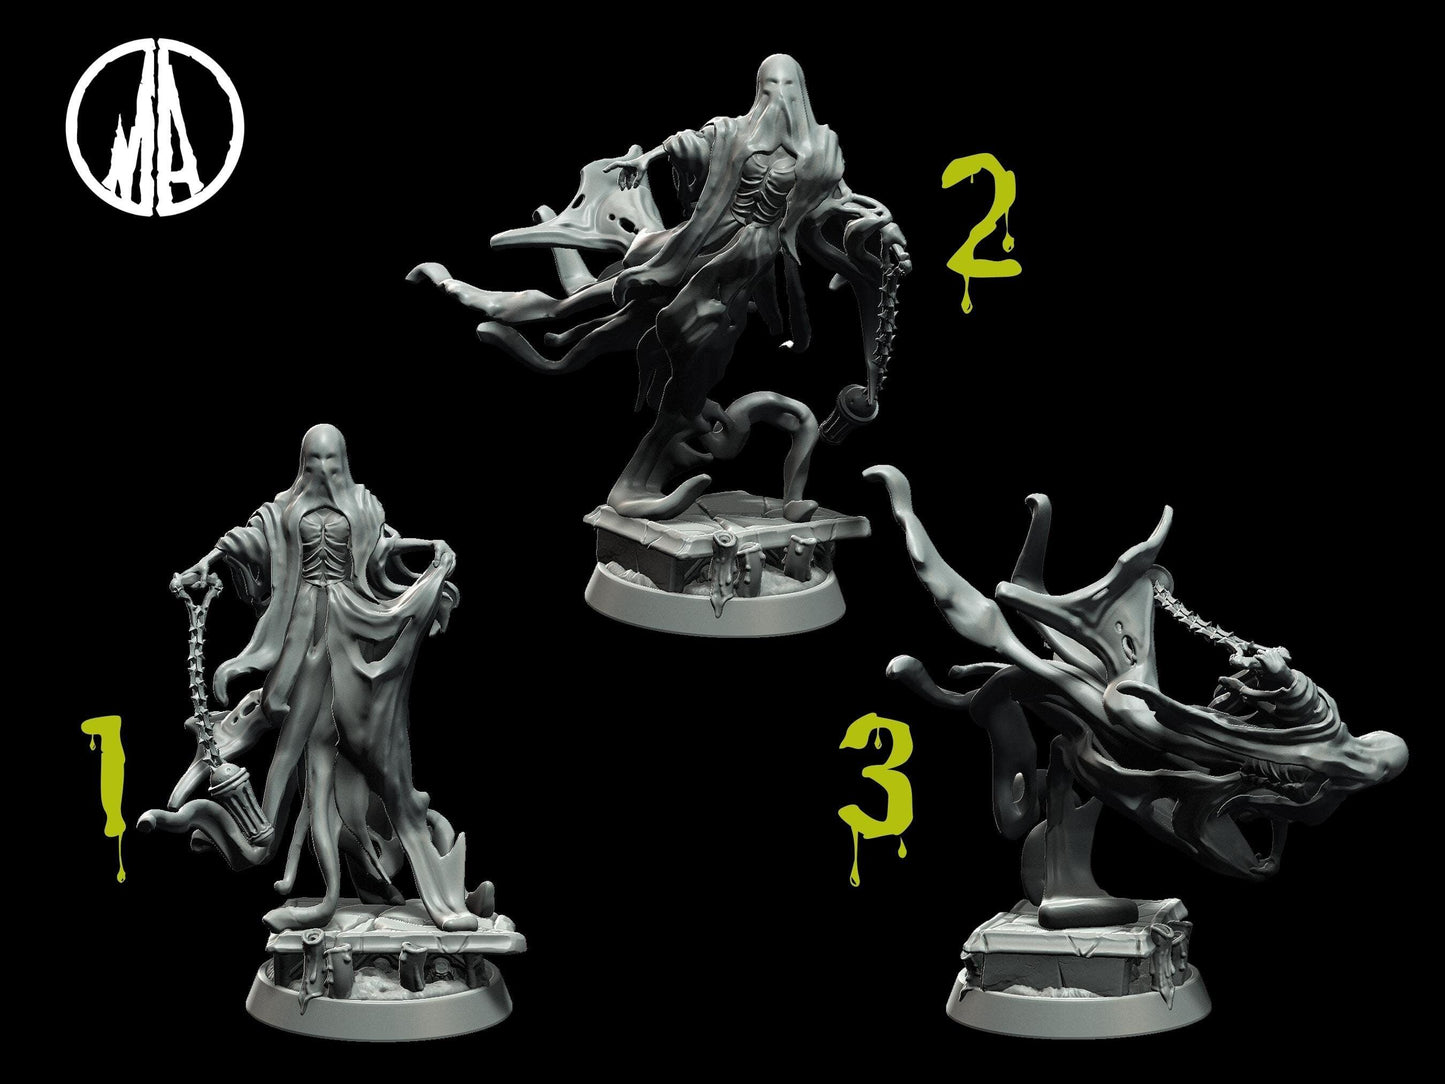 Wailing Hag Miniature - 3 Poses - 28mm scale Tabletop gaming DnD Miniature Dungeons and Dragons, dnd 5e wargaming - Plague Miniatures shop for DnD Miniatures